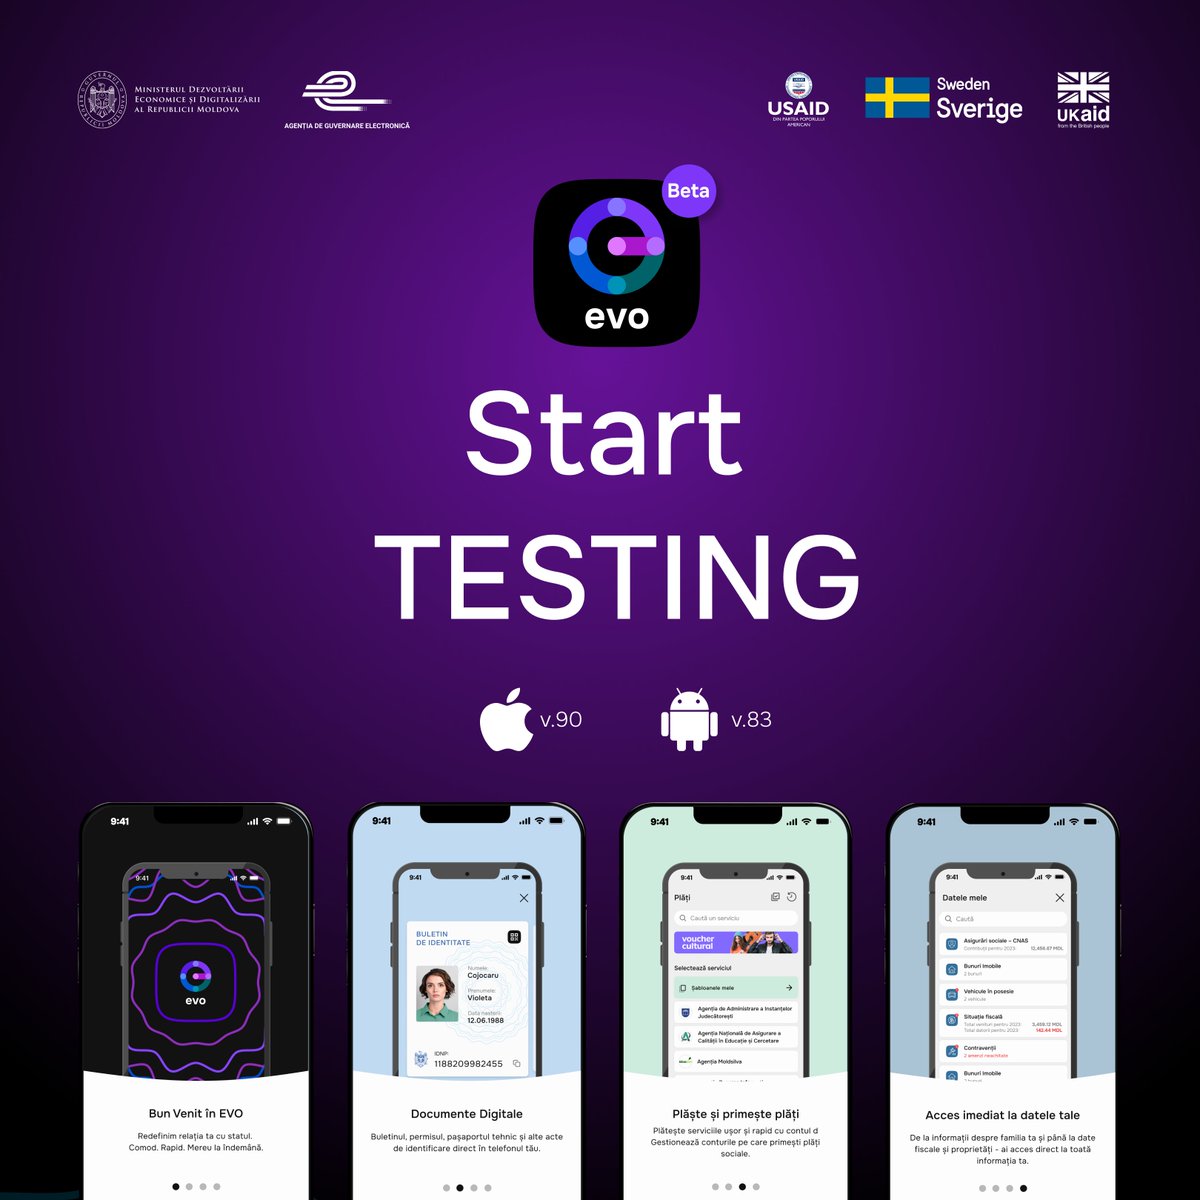 EVO Beta testing begins! Over 3,500 volunteers are onboard to refine the app, ensuring a top-notch user experience at launch. As one of the testers, I'm excited to contribute to an app that will streamline how citizens and entrepreneurs interact with the state.